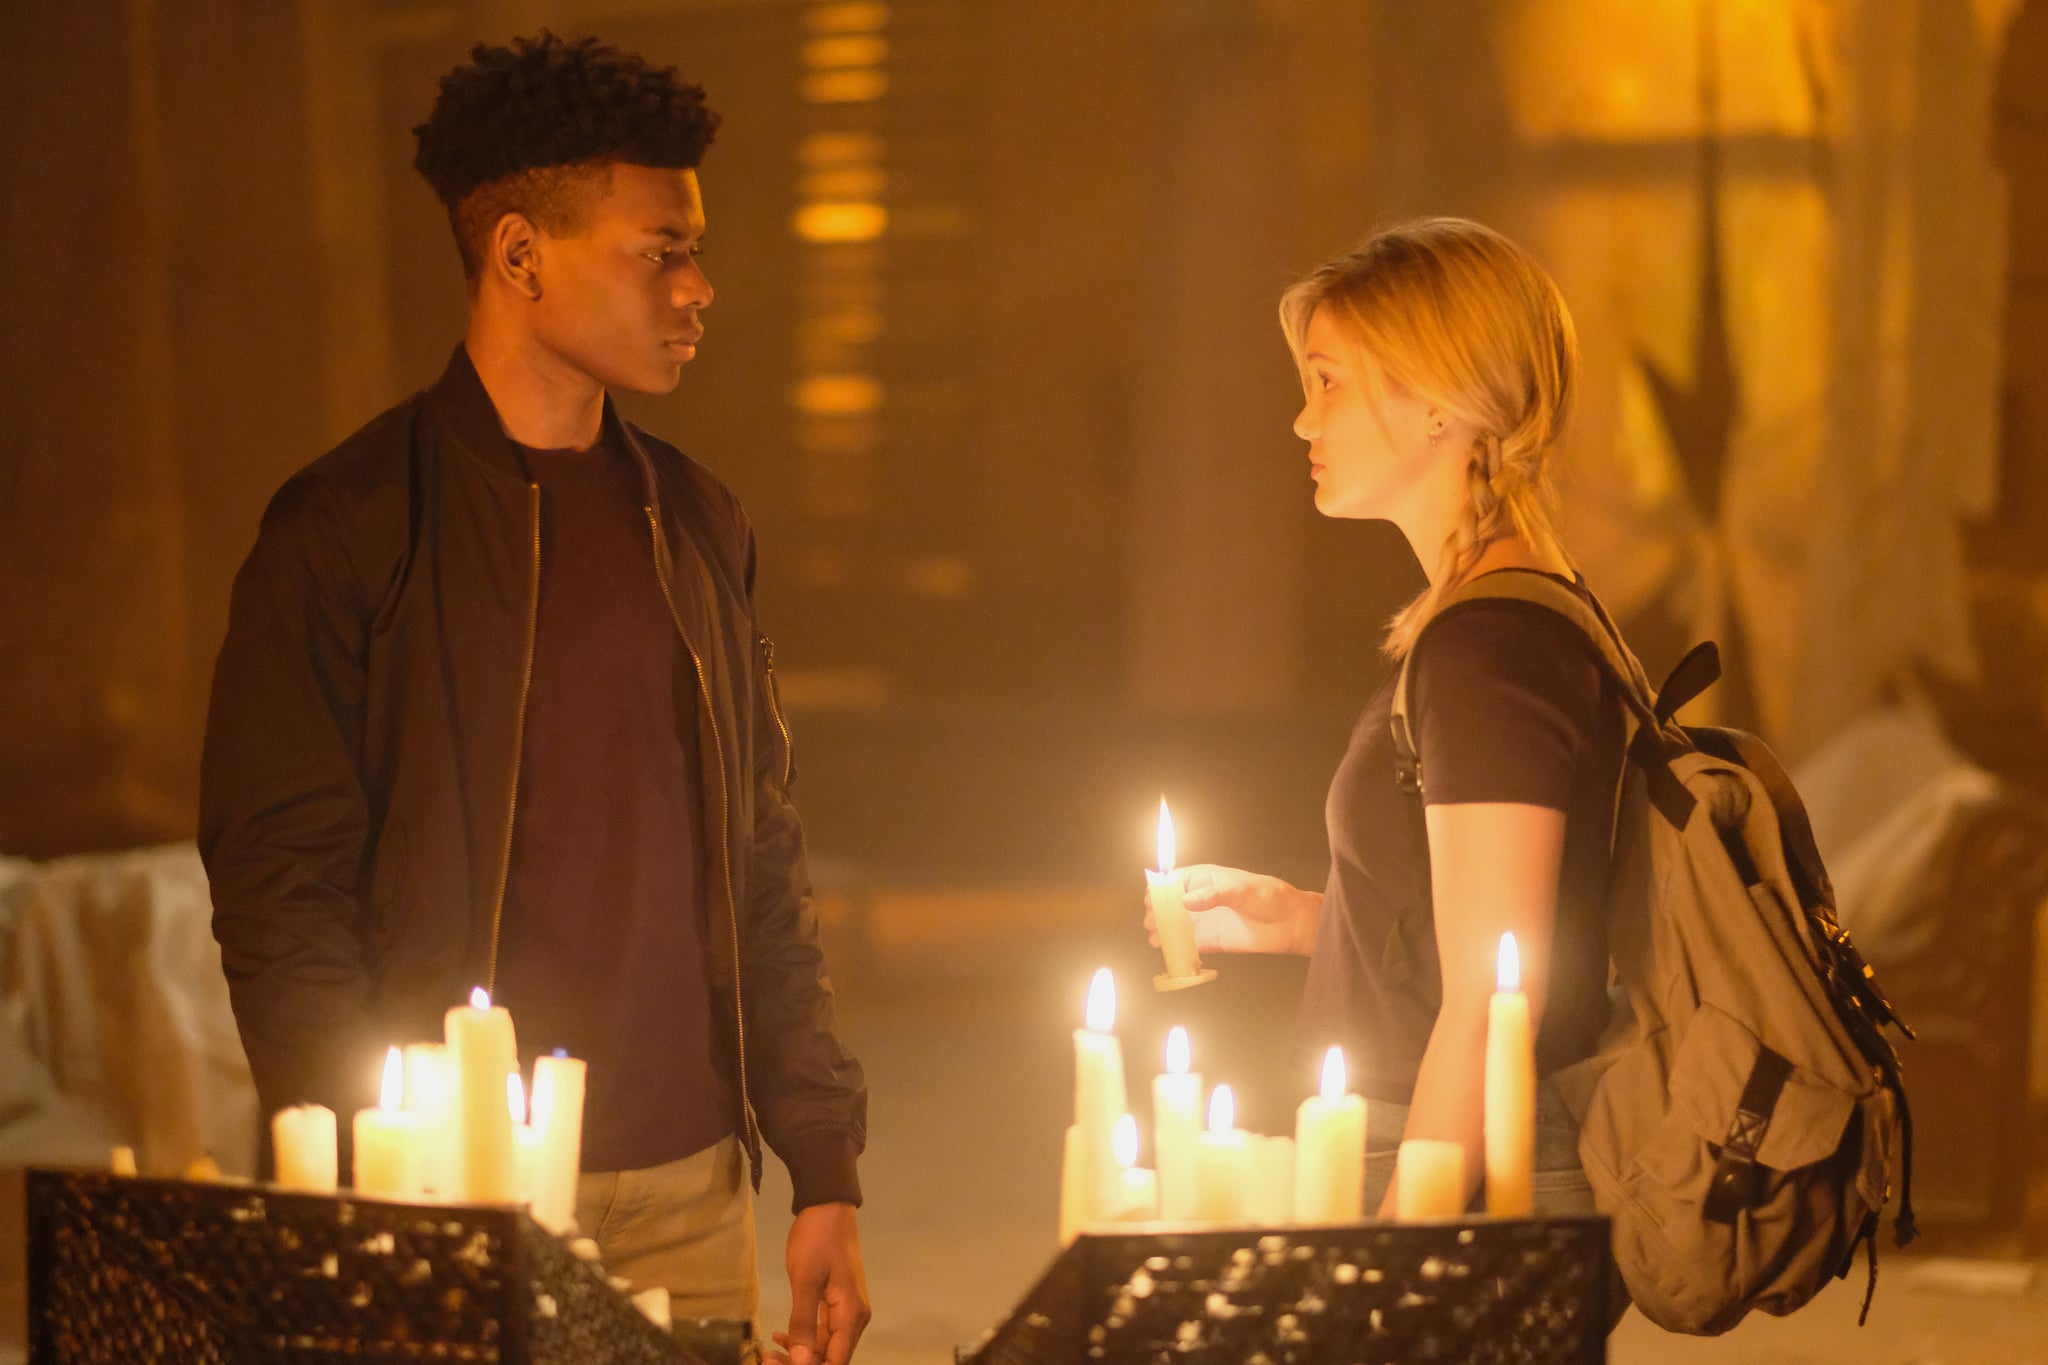 MARVEL'S CLOAK & DAGGER - Marvels Cloak & Daggeris the story of Tandy Bowen (Olivia Holt) and Tyrone Johnson (Aubrey Joseph) - two teenagers from very different backgrounds, who find themselves burdened and awakened to newly acquired superpowers which are mysteriously linked to one another. Tandy can emit light daggers and Tyrone has the ability to engulf others in darkness. They quickly learn they are better together than apart, but their feelings for each other make their already complicated world even more challenging.Marvels Cloak & Dagger stars Olivia Holt, Aubrey Joseph, Andrea Roth, Gloria Reuben,Miles Mussenden, Carl Lundstedt, Emma Lahana, Jaime Zevallos, and J.D. Evermore.The series will premiere on Thursday, June 7 (8:00 - 10:00 p.m. EDT/PDT) andis co-produced by Marvel Television and ABC Signature Studios. (Freeform/Alfonso Bresciani)AUBREY JOSEPH, OLIVIA HOLT